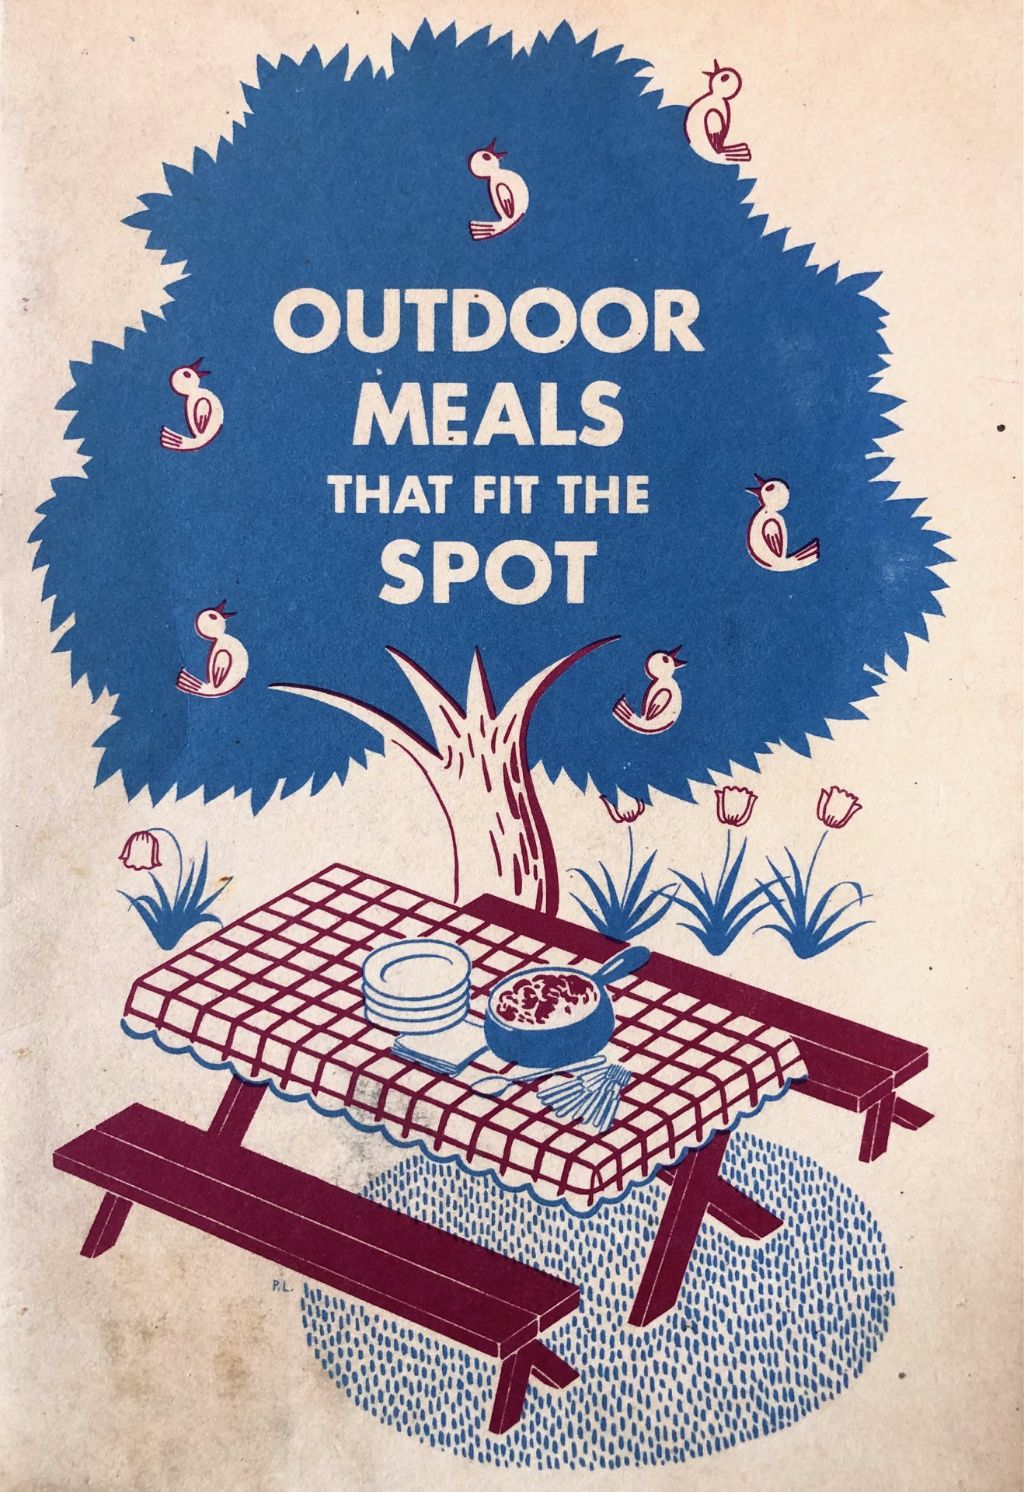 (*NEW ARRIVAL*) (Camping) California Dairy Products. Outdoor Meals that Fit the Spot